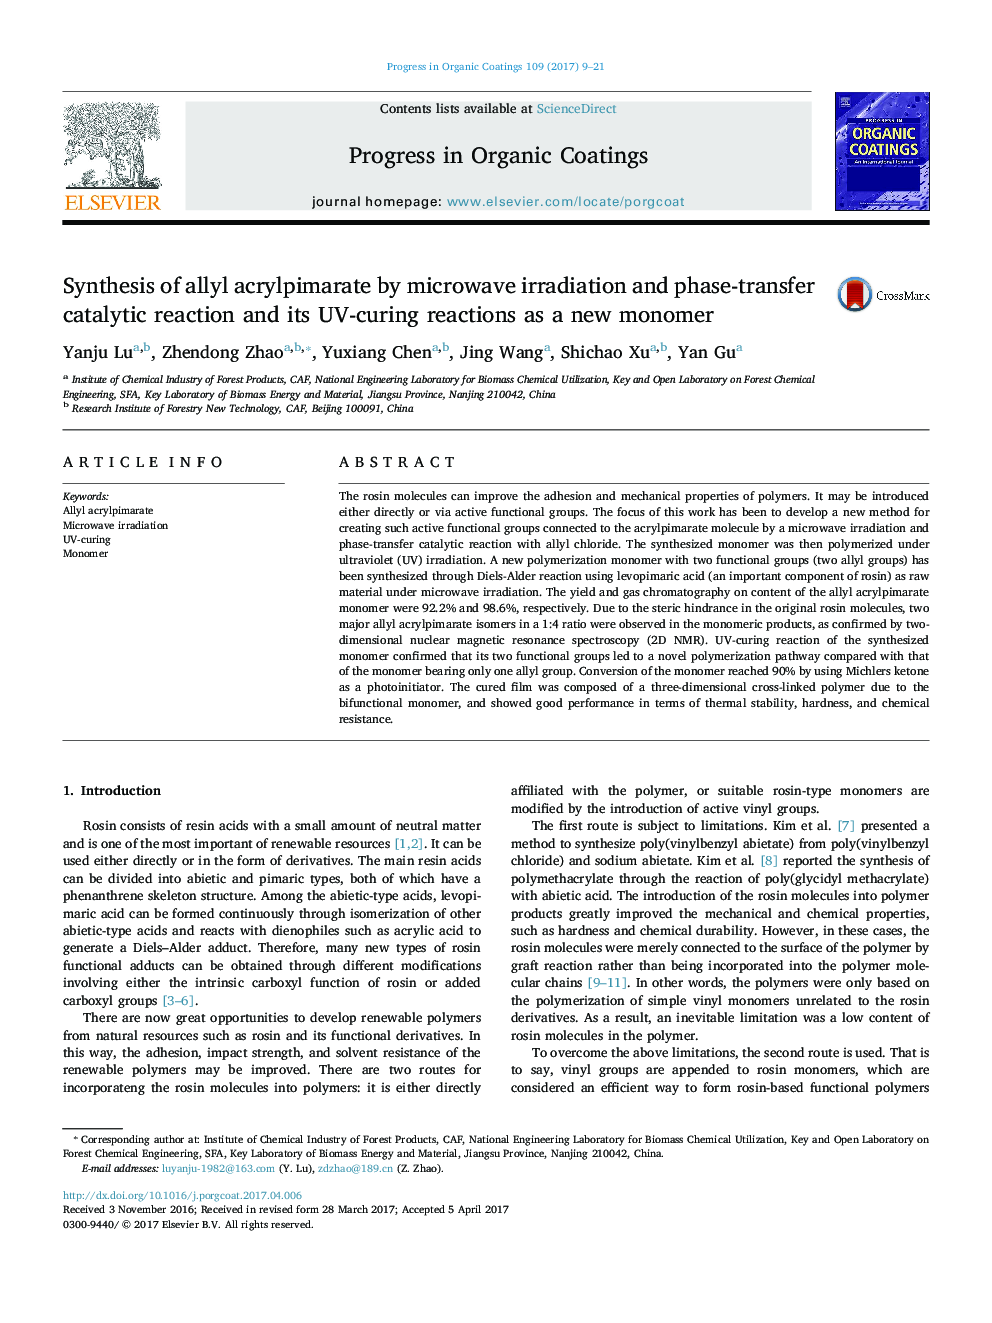 Synthesis of allyl acrylpimarate by microwave irradiation and phase-transfer catalytic reaction and its UV-curing reactions as a new monomer